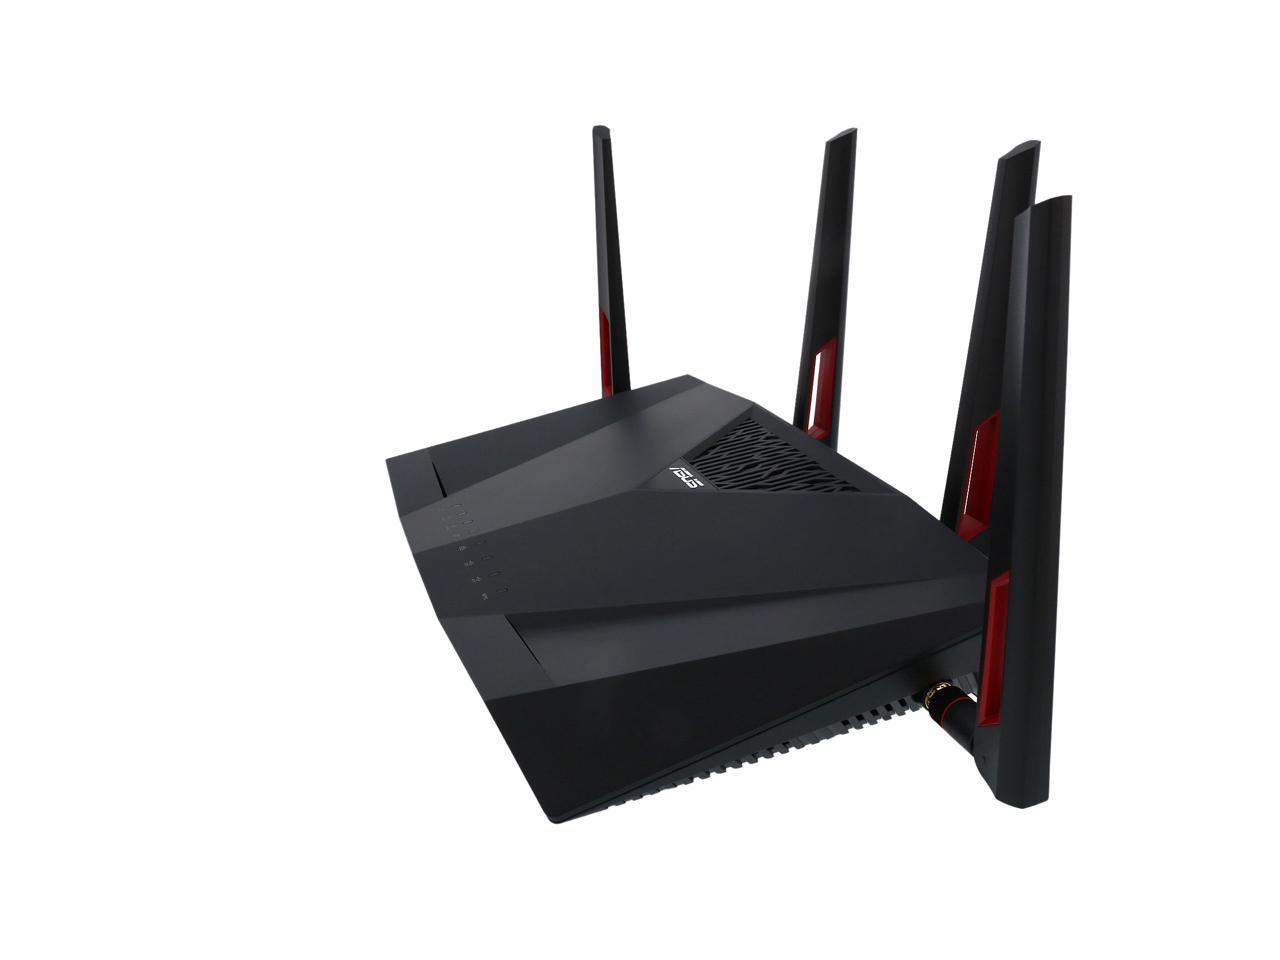 ASUS AC3100 Wi-Fi Dual-band Gigabit Wireless Router with 4x4 MU-MIMO, 8 x  LAN Ports, AiProtection Network Security and WTFast Game Accelerator,  AiMesh 